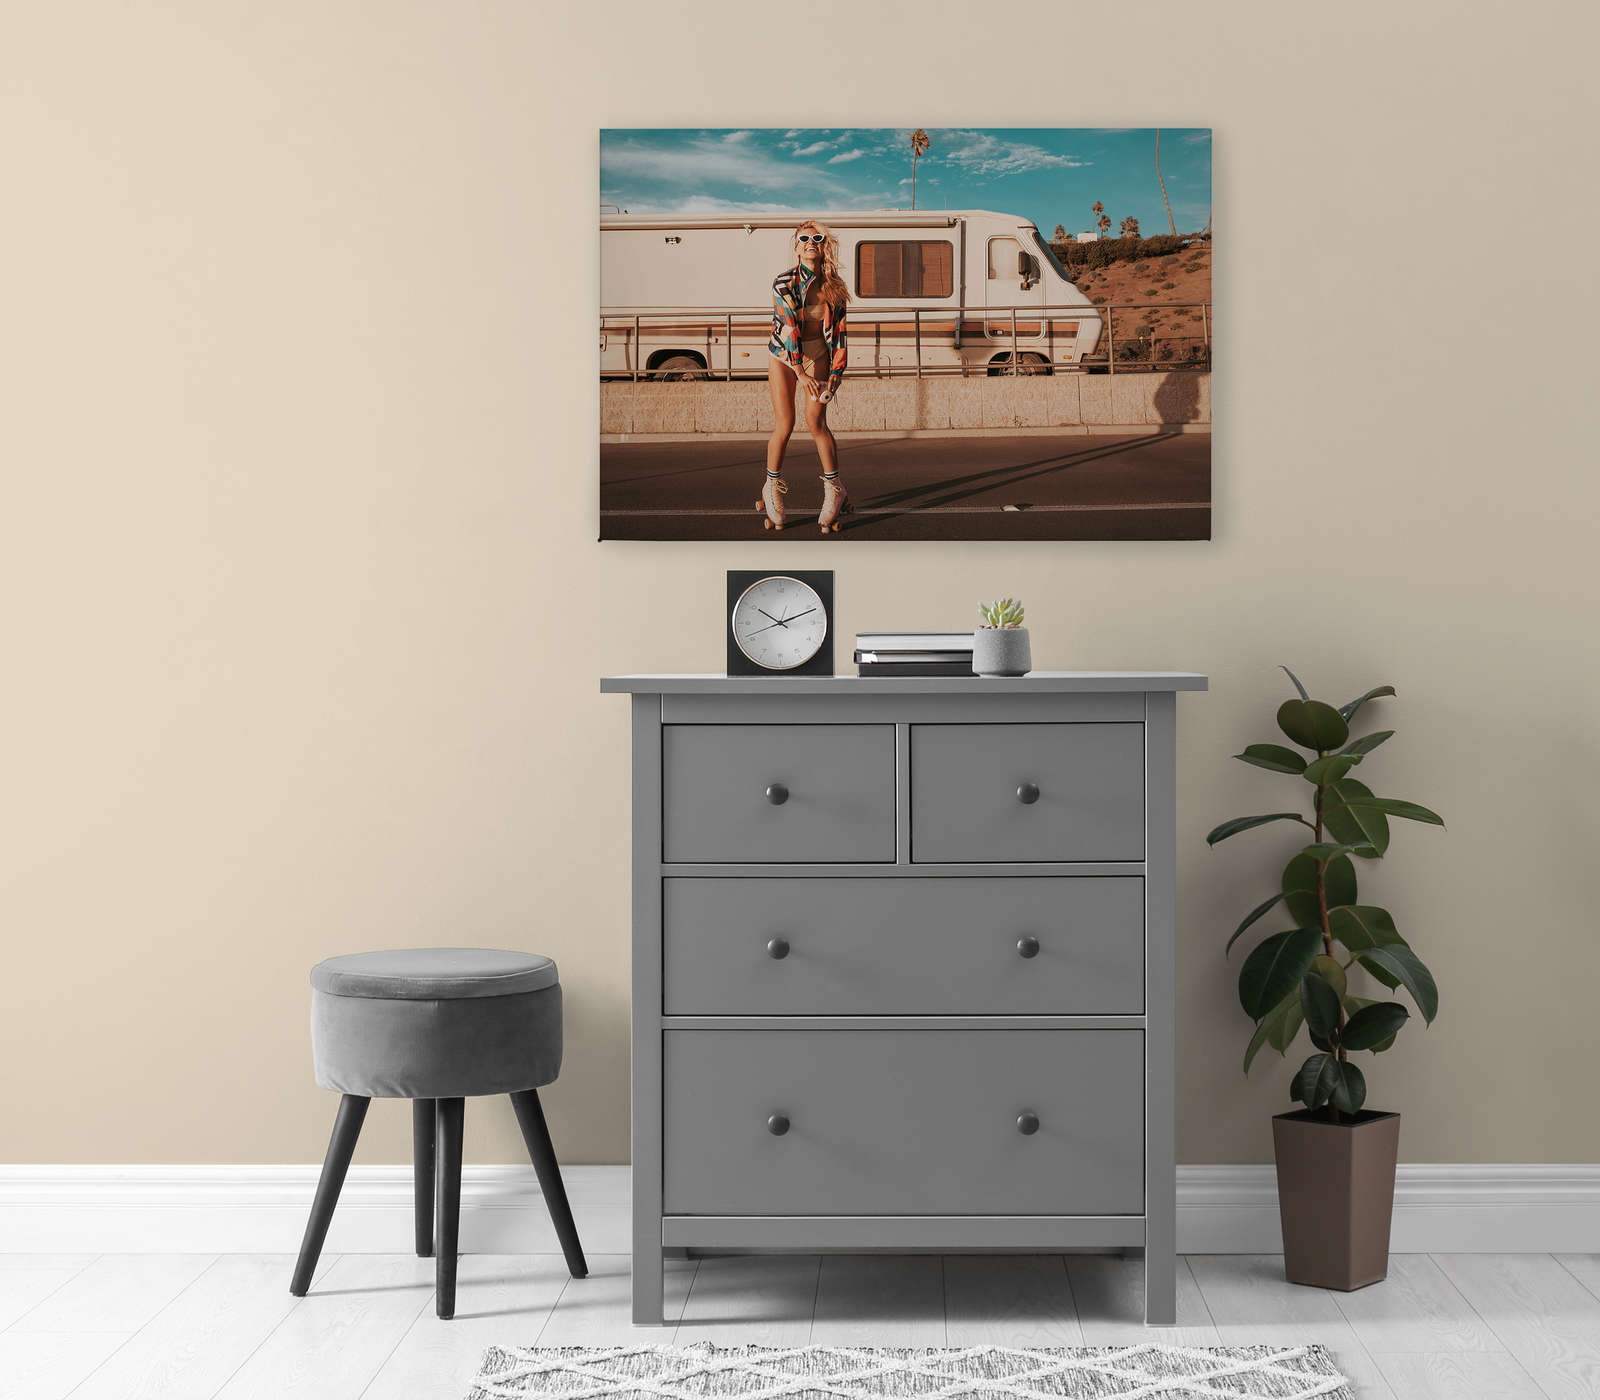             Canvas painting with Skater Girl and Camper in Summer Vibe - 0.90 m x 0.60 m
        